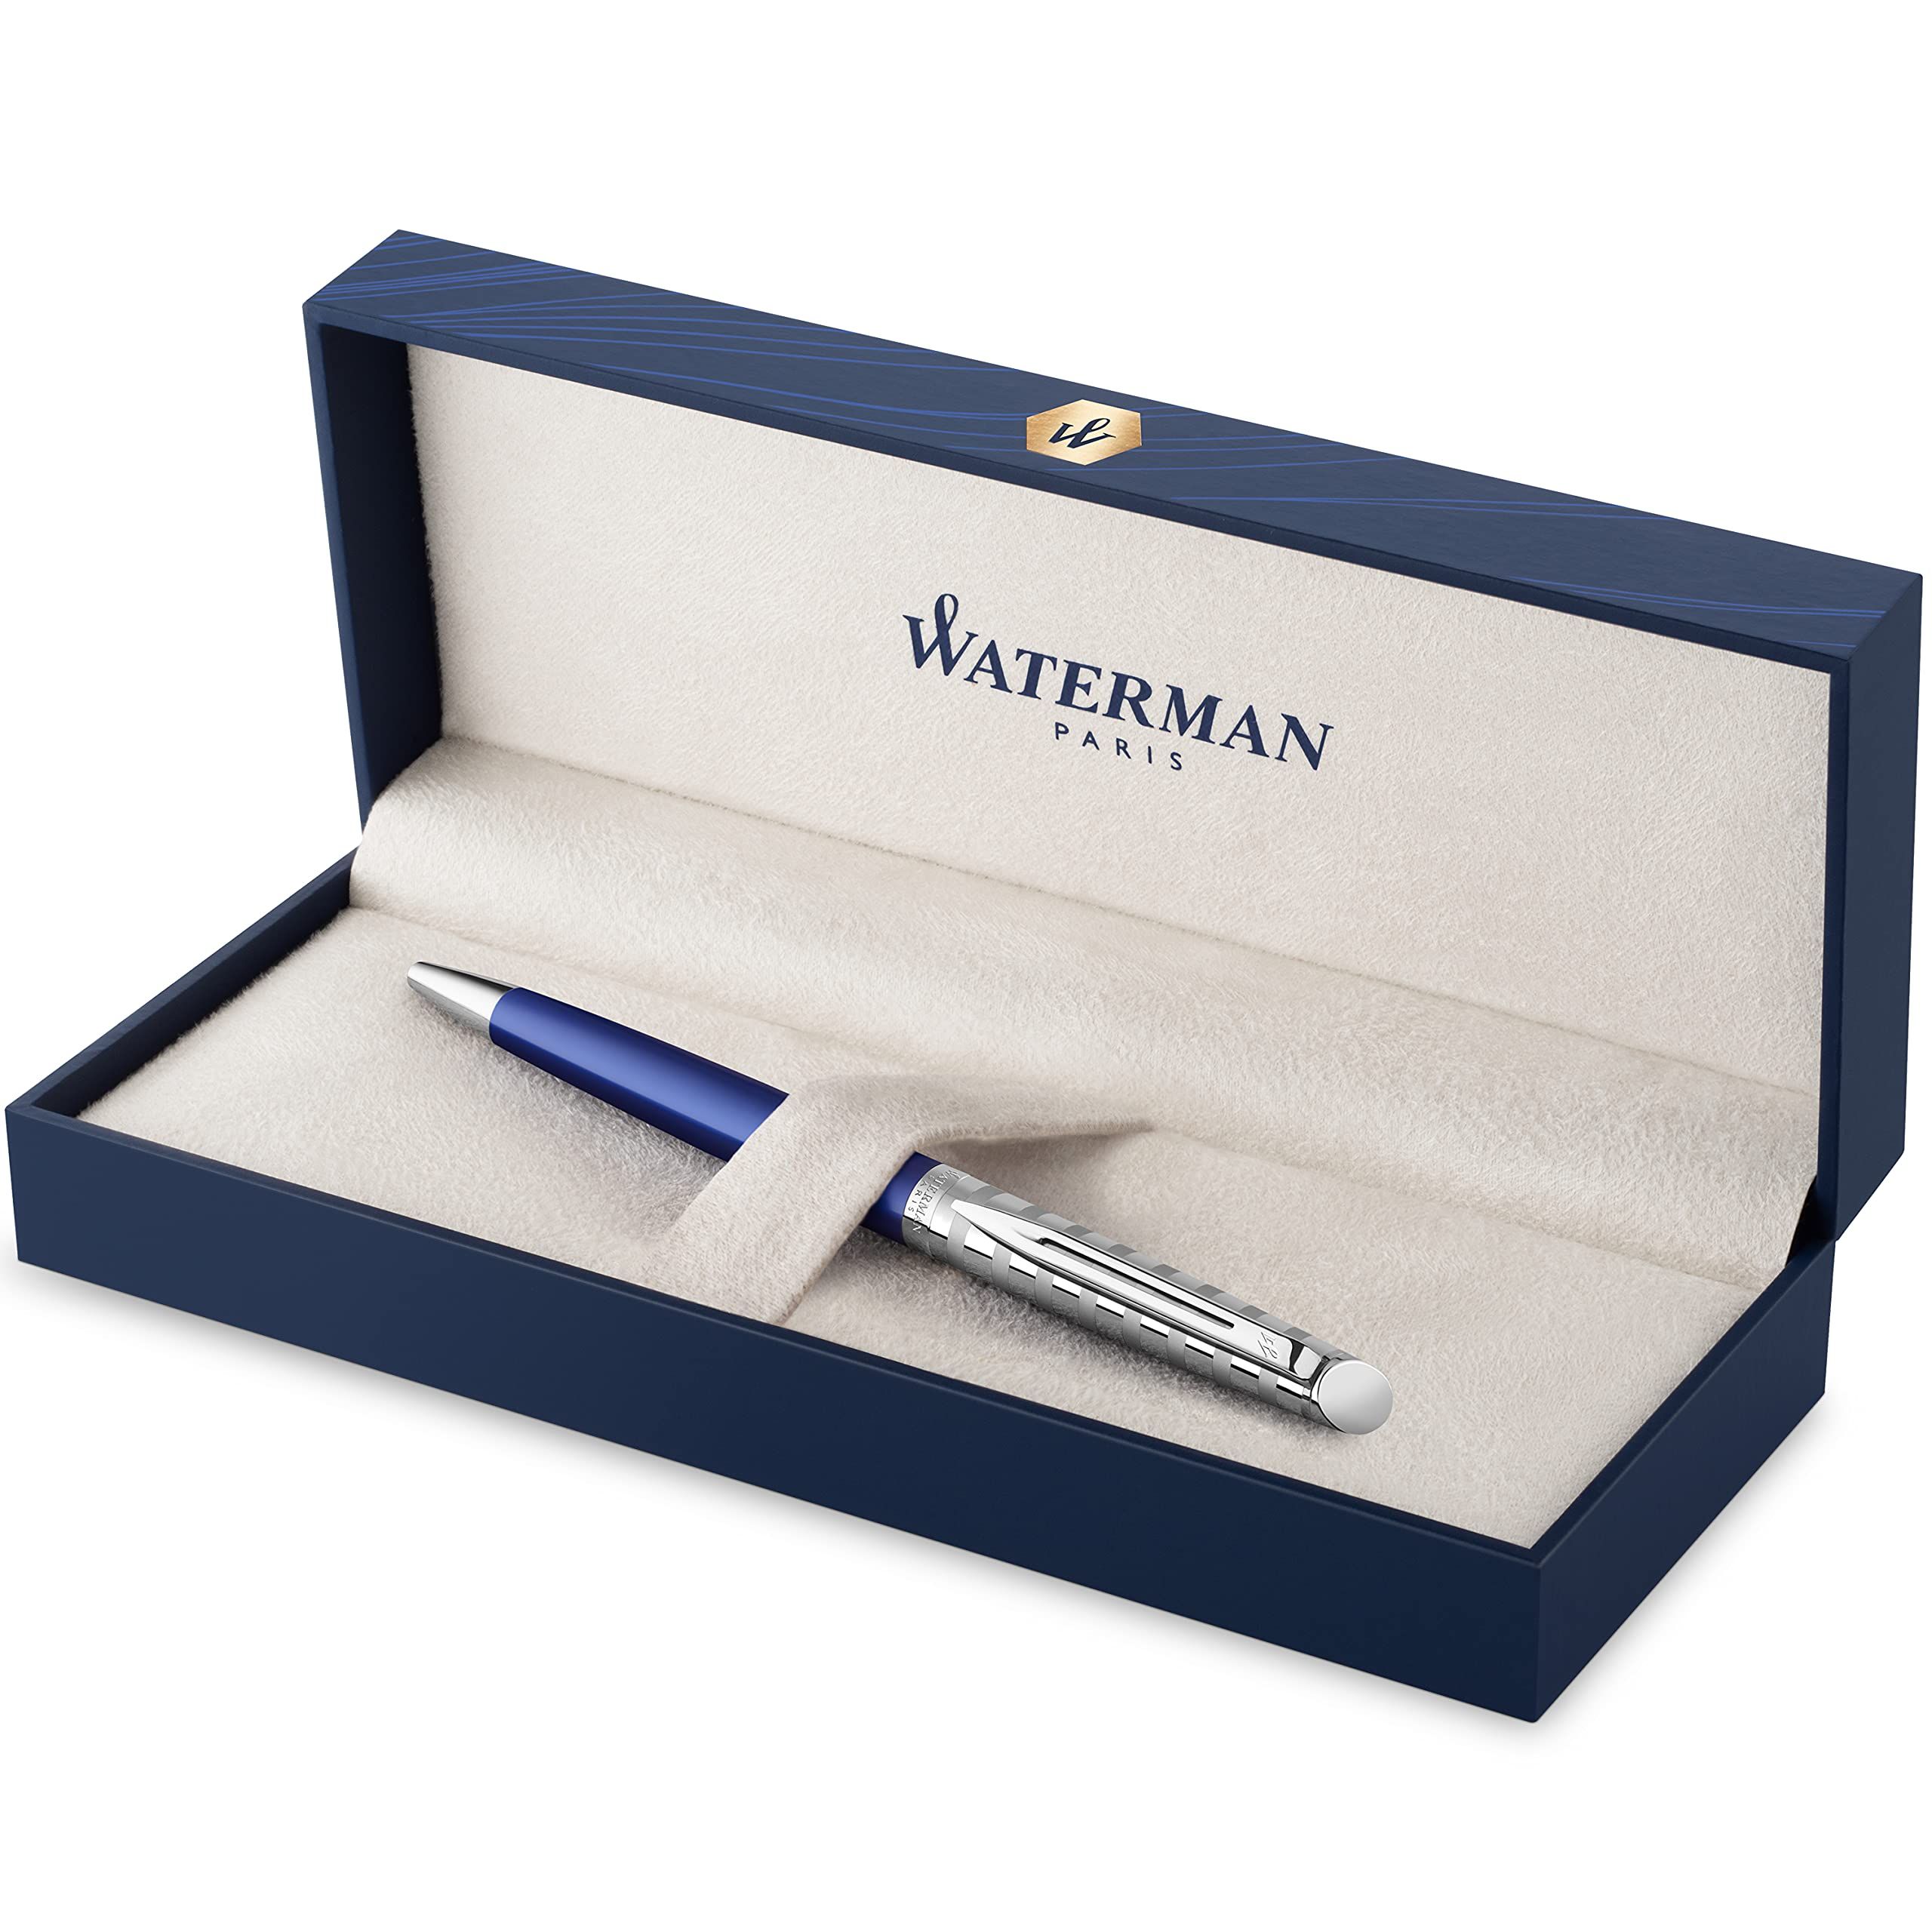 Gifts for Birthday - Personalized parker pen - Unique birthday gift :  Amazon.in: Home & Kitchen